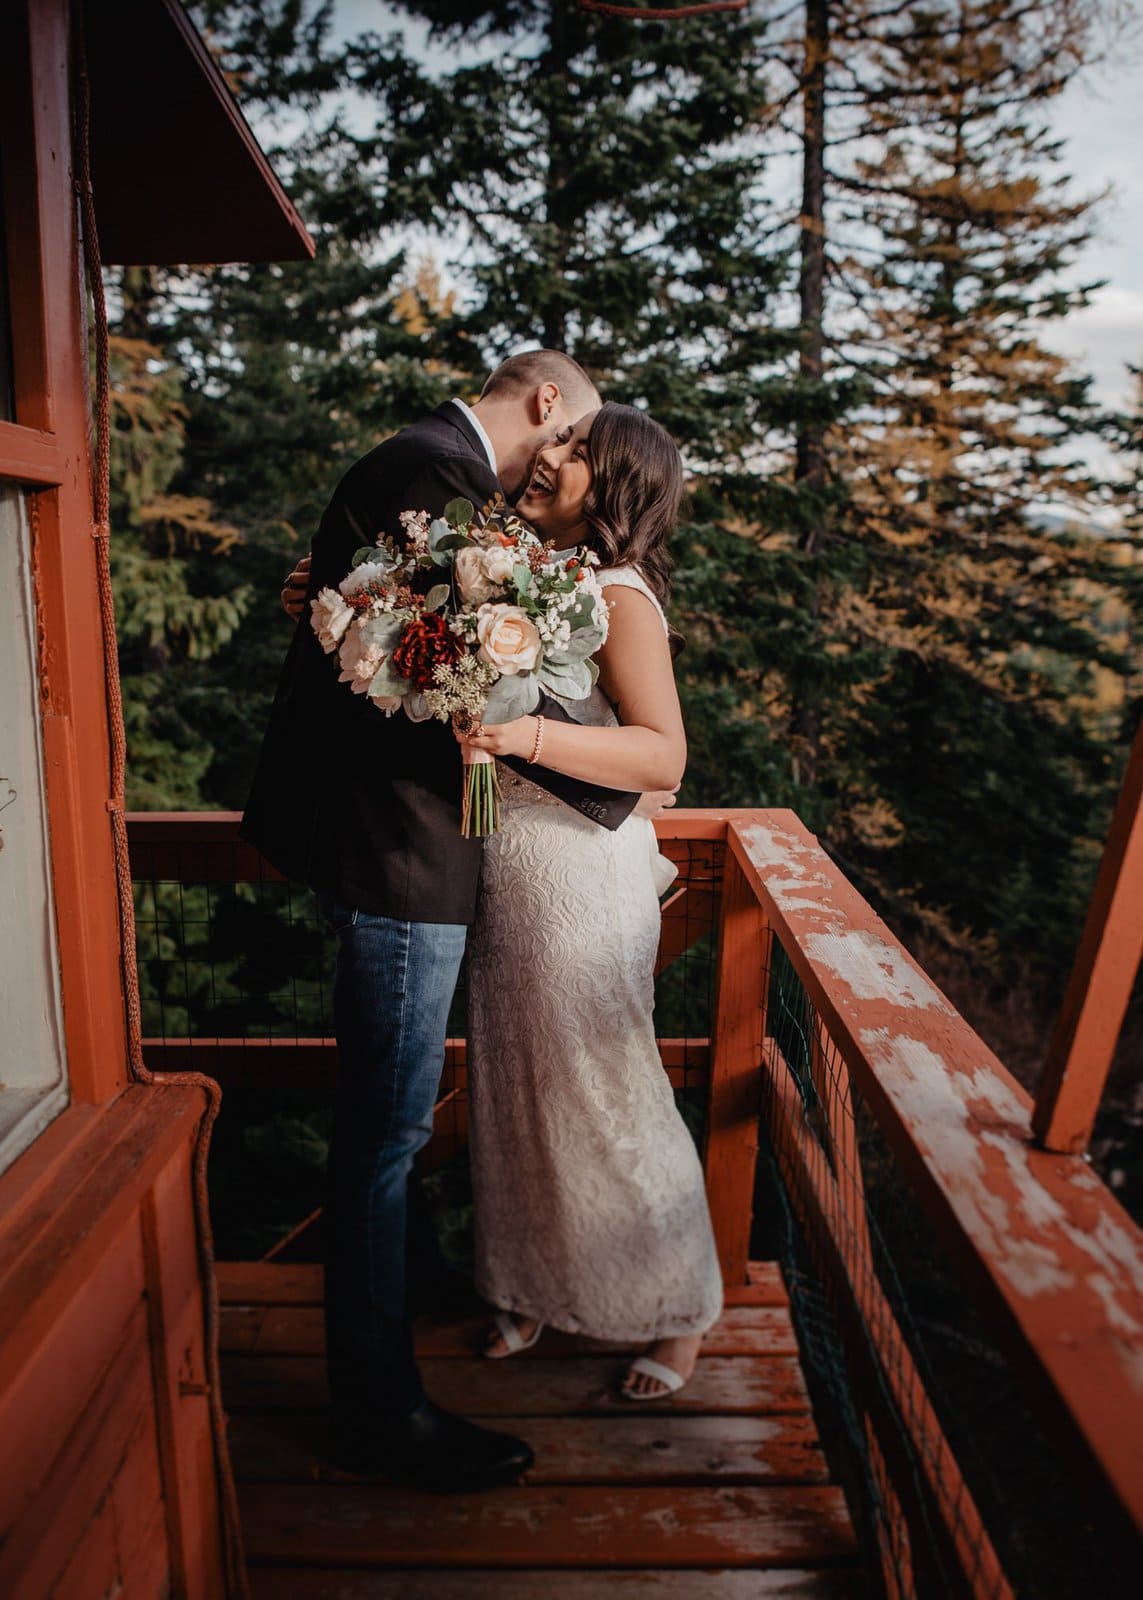 simple elopement with intimate moments.